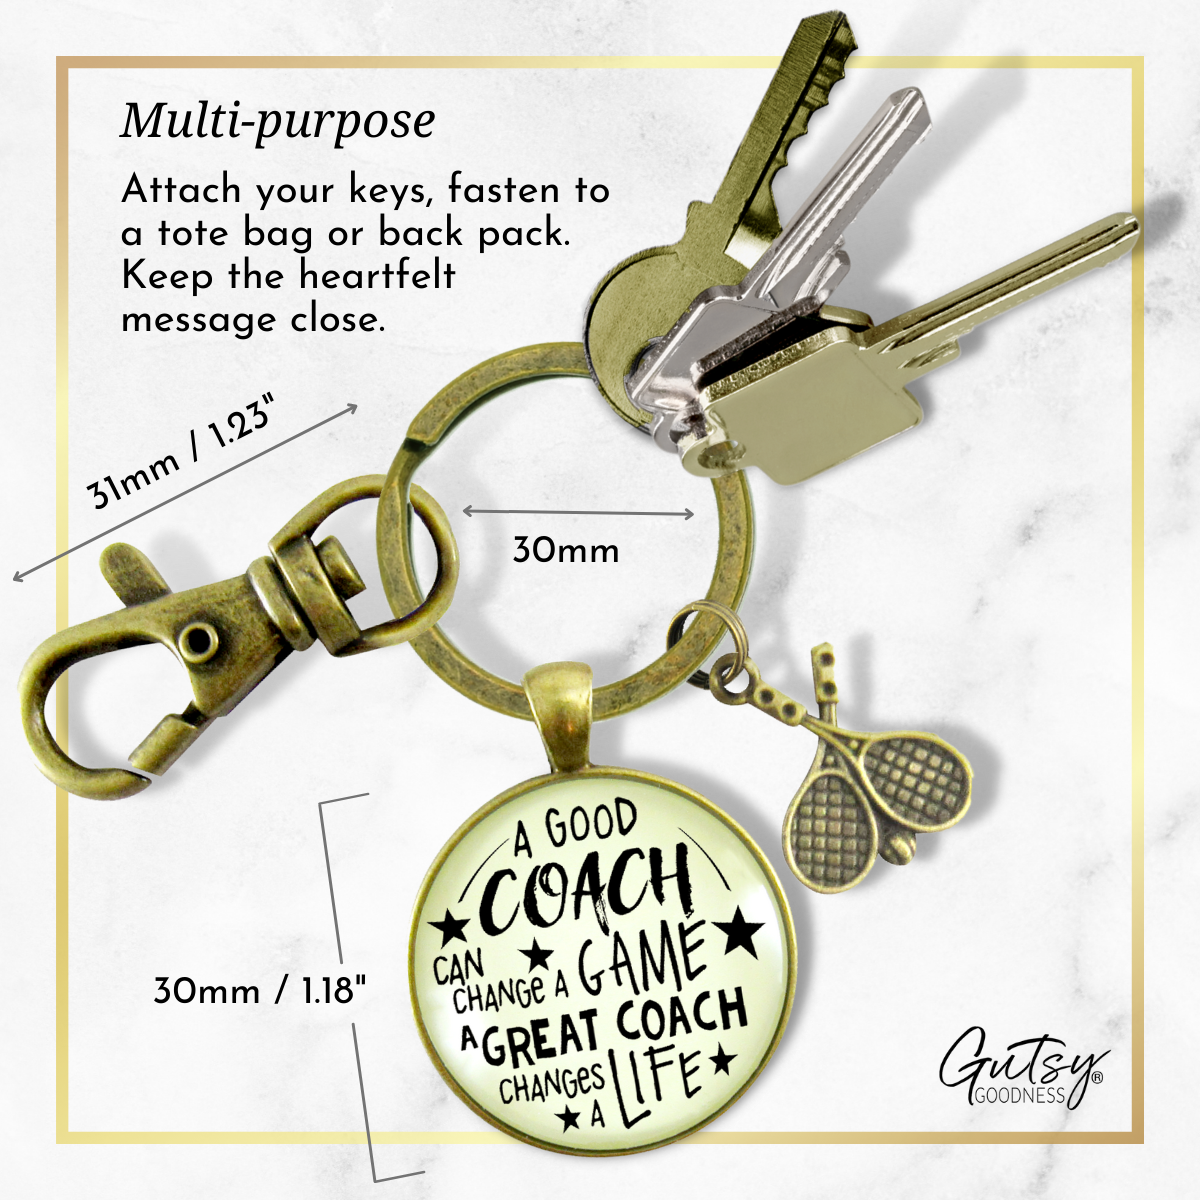 Tennis Coaching Sport Keychain Great Coach Changes Life Thank You Gift - Gutsy Goodness Handmade Jewelry;Tennis Coaching Sport Keychain Great Coach Changes Life Thank You Gift - Gutsy Goodness Handmade Jewelry Gifts